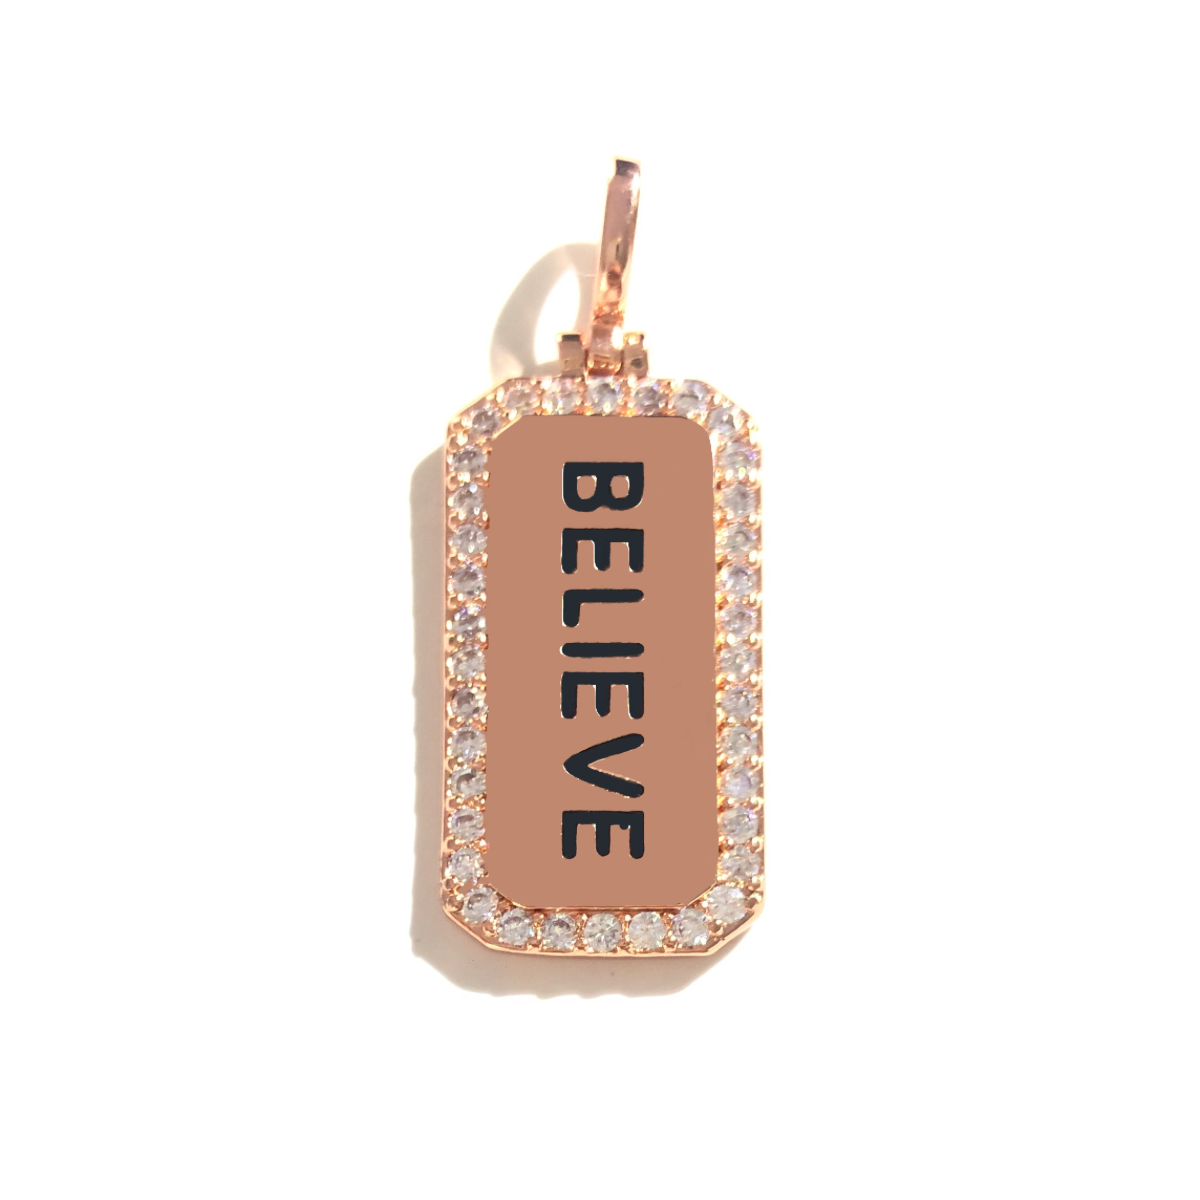 10pcs/lot 38*15mm CZ Paved Believe Word Tags Charms Pendants Rose Gold CZ Paved Charms Christian Quotes New Charms Arrivals Word Tags Charms Beads Beyond